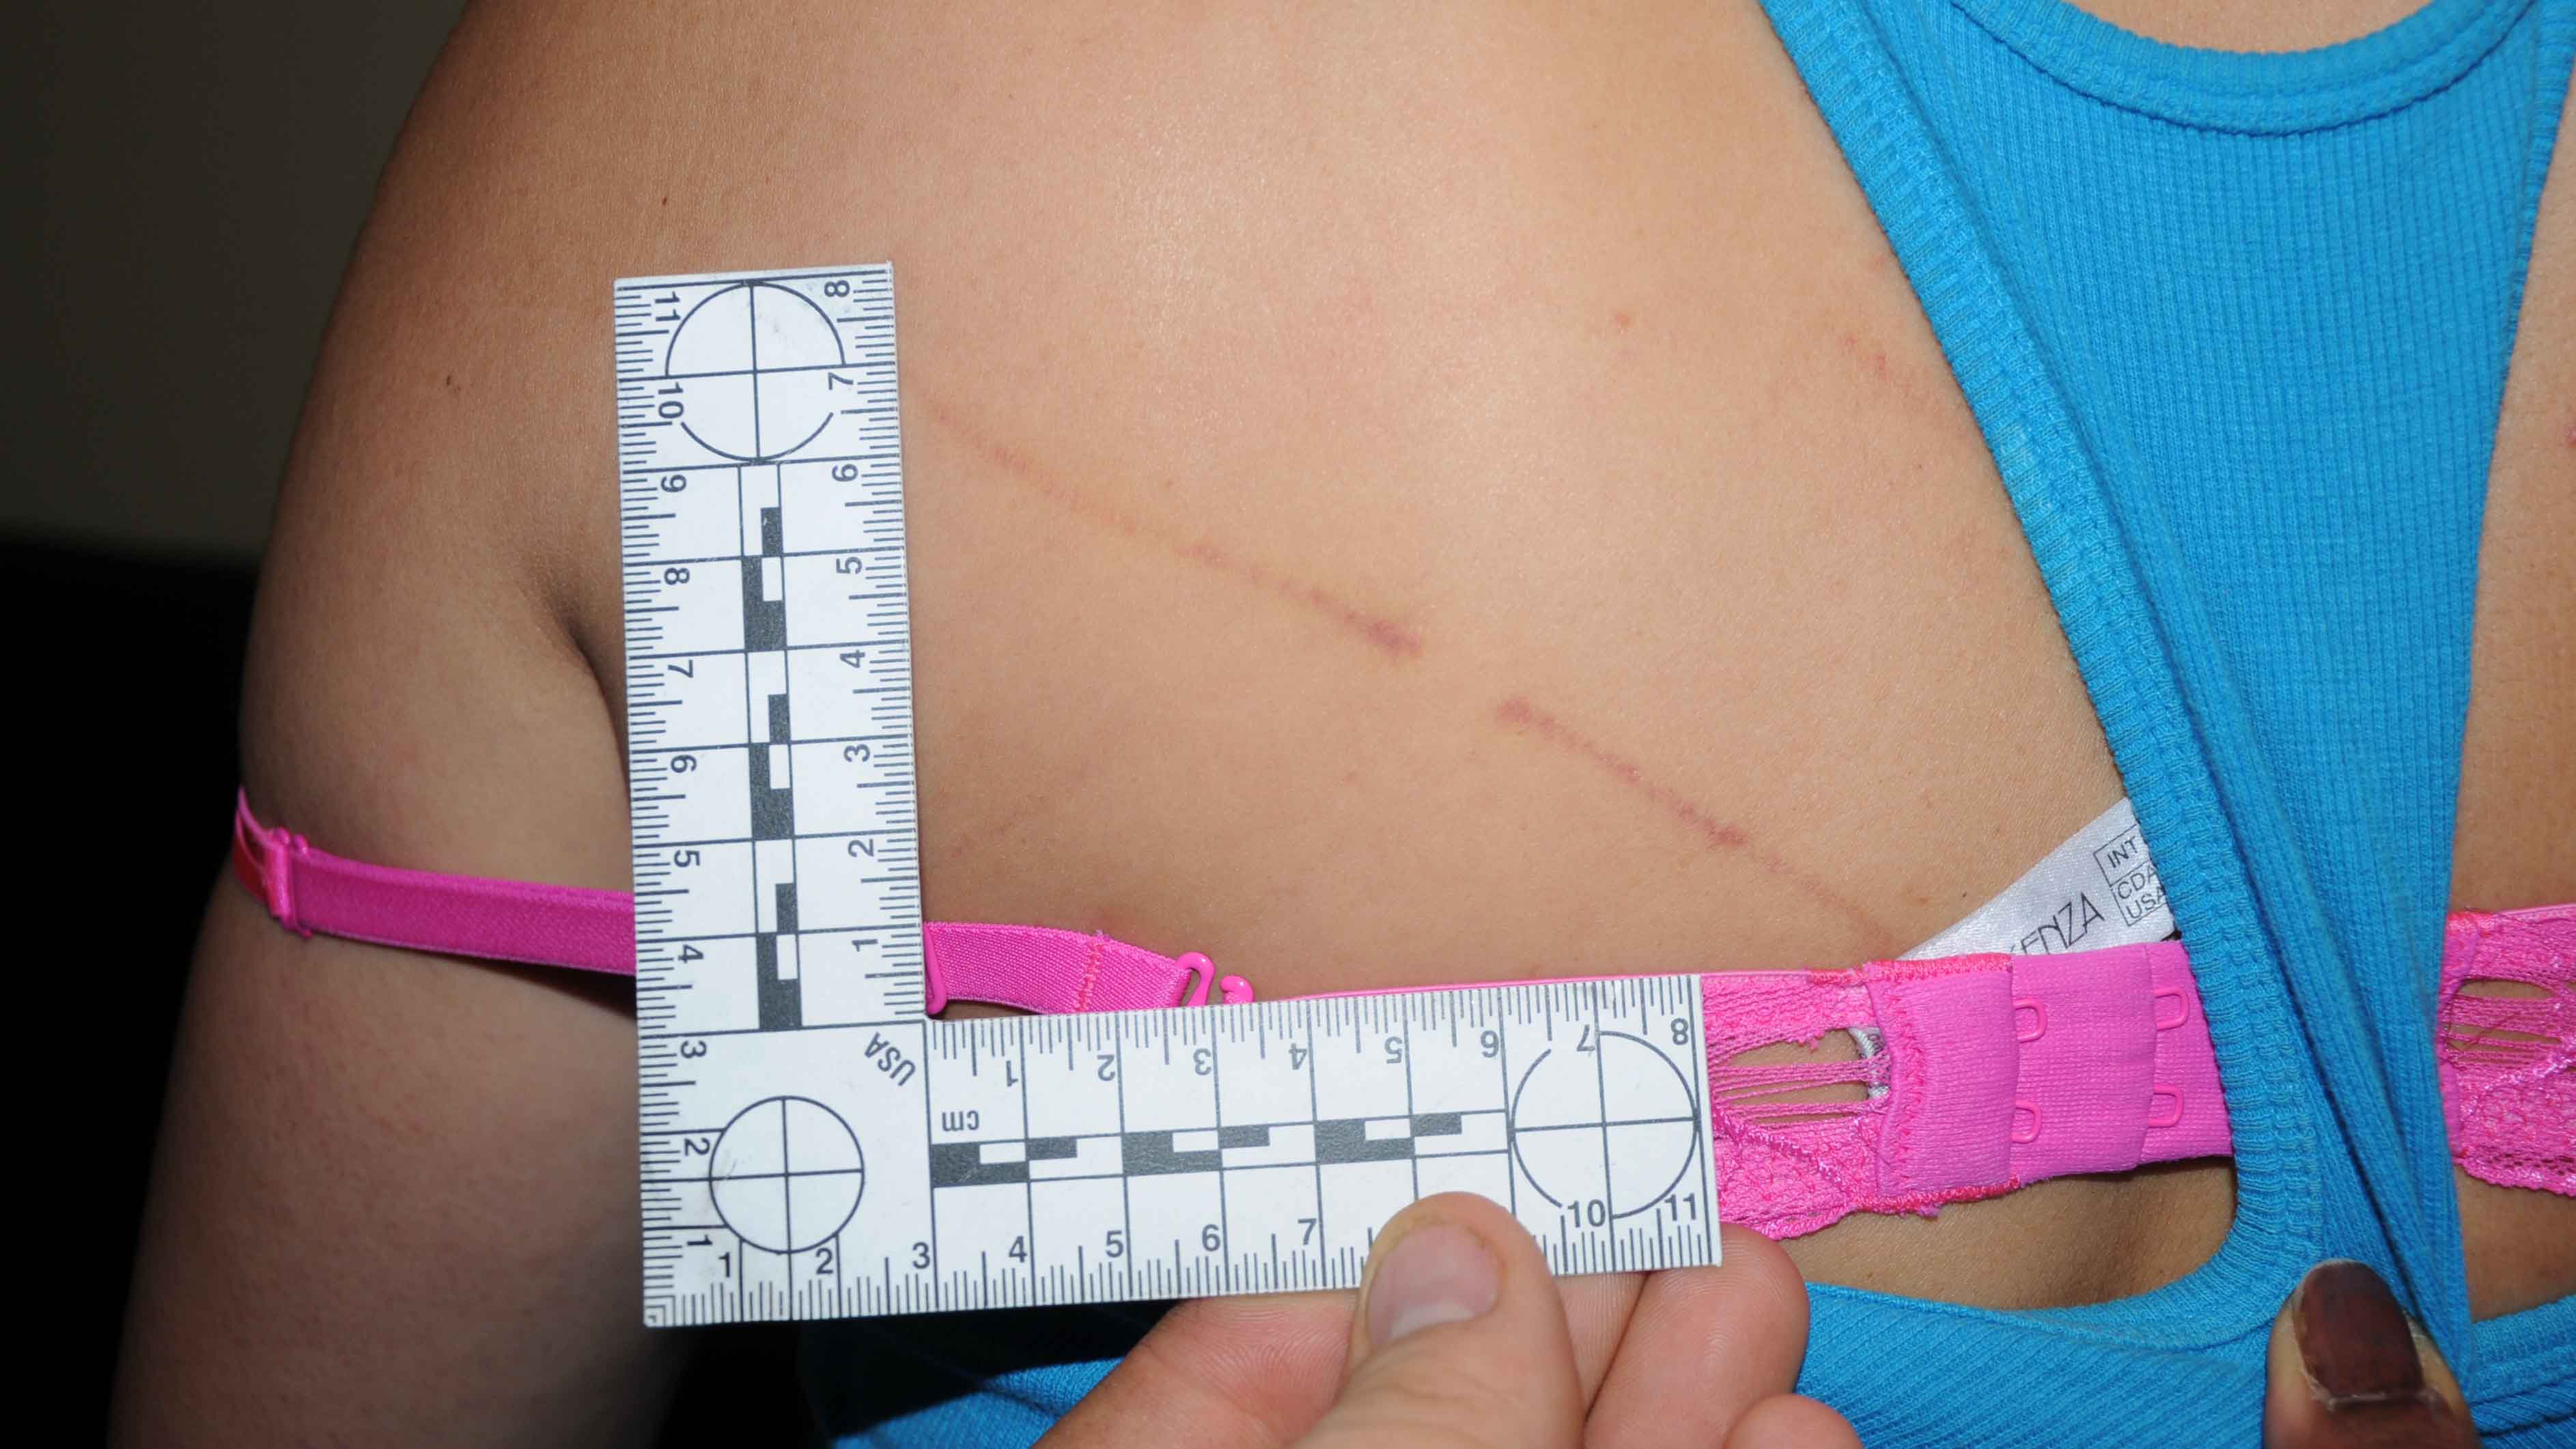 Photo of scratches victim allegedly received at the hands of suspended Senator Patrick Brazeau.